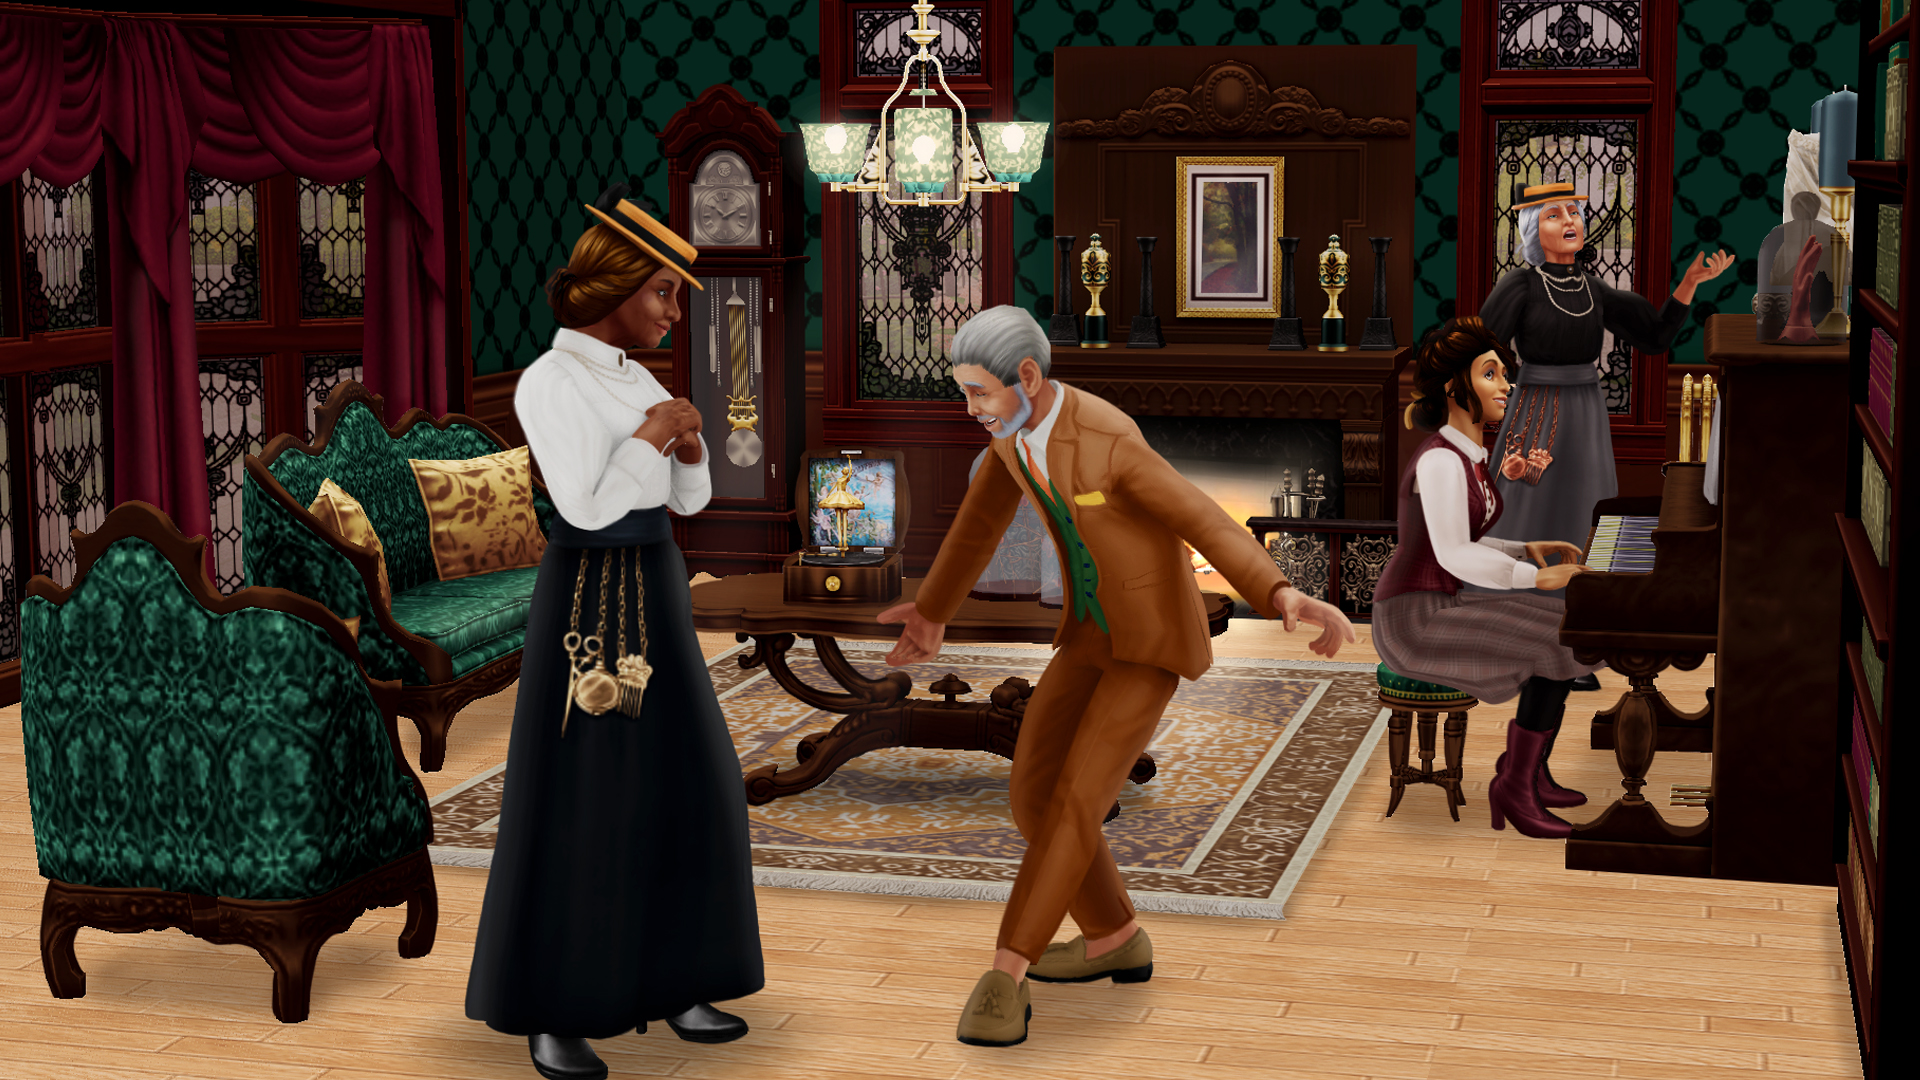 Grow your family  Sims, Sims free play, Free mobile games